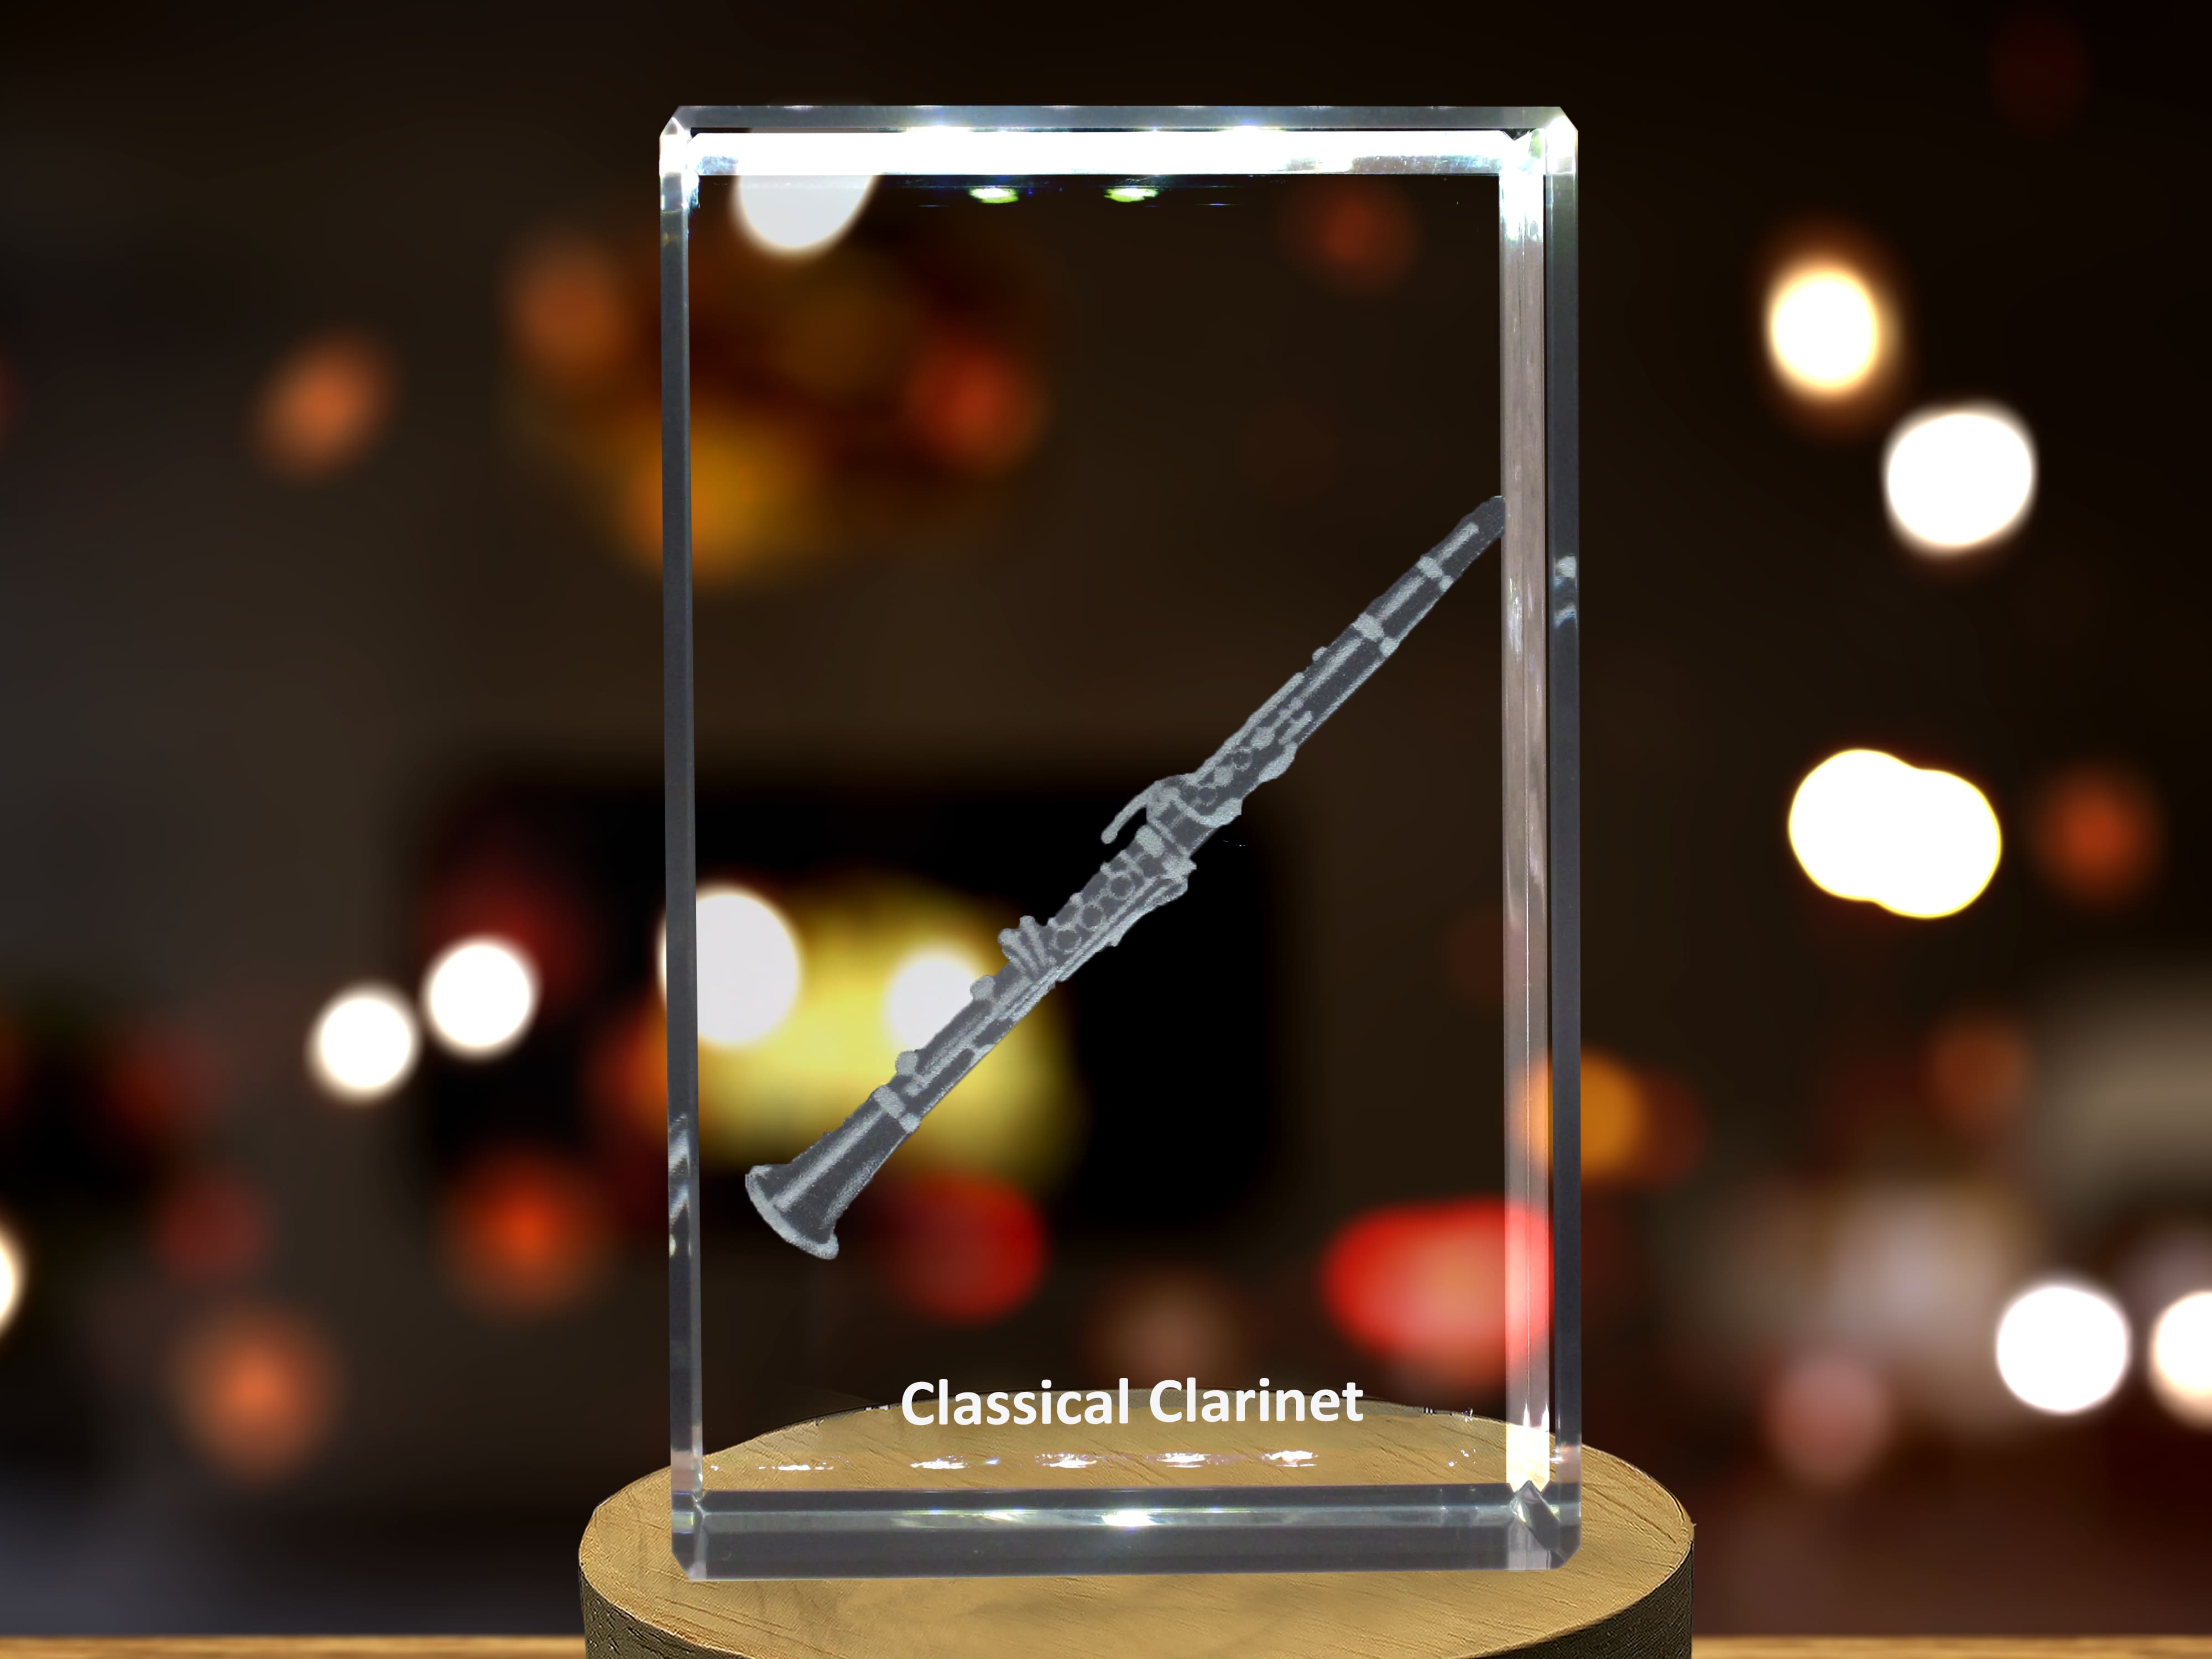 Clarinet 3D Engraved Crystal | Music 3D Engraved Crystal Keepsake A&B Crystal Collection